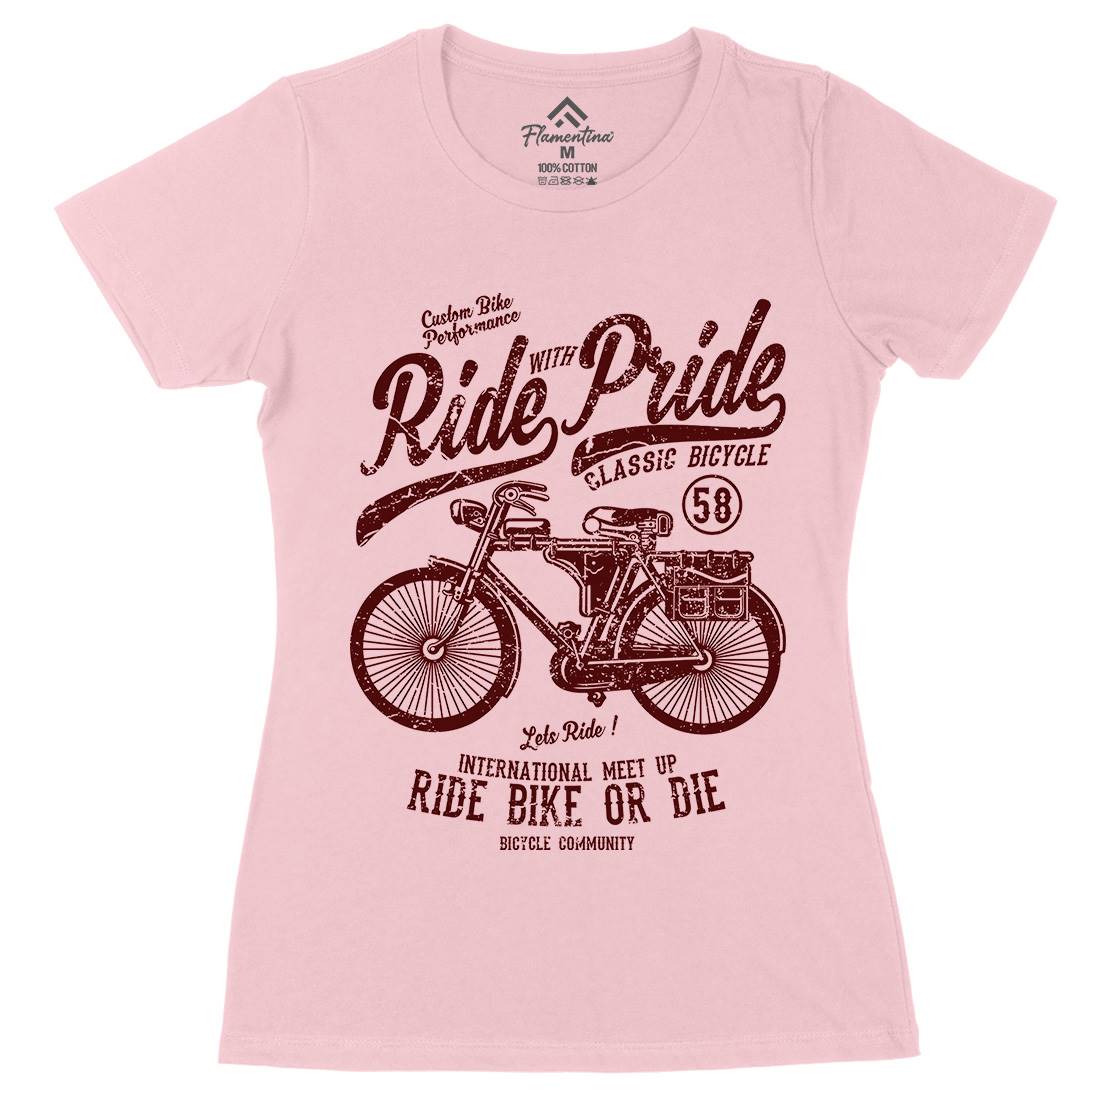 Ride With Pride Womens Organic Crew Neck T-Shirt Bikes A121